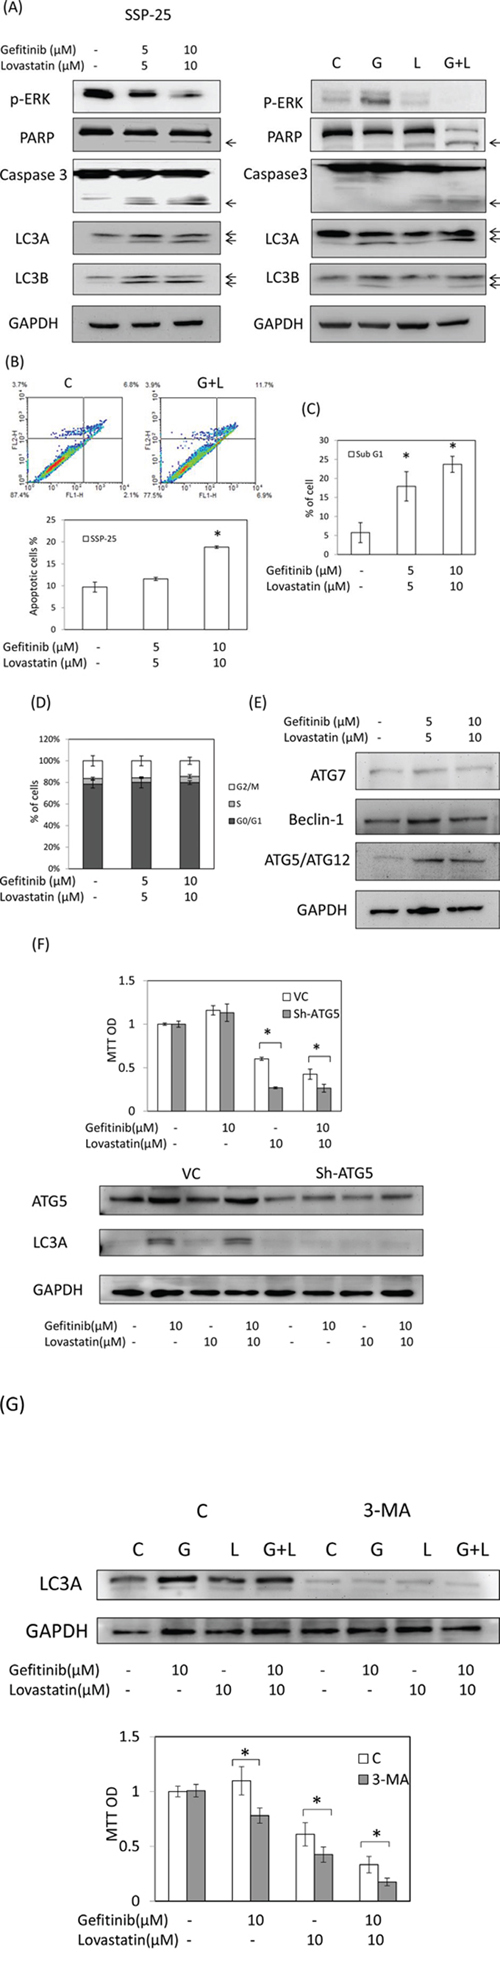 Combined treatment of gefitinib and lovastatin induced apoptosis and autophagy in SSP-25 cells.